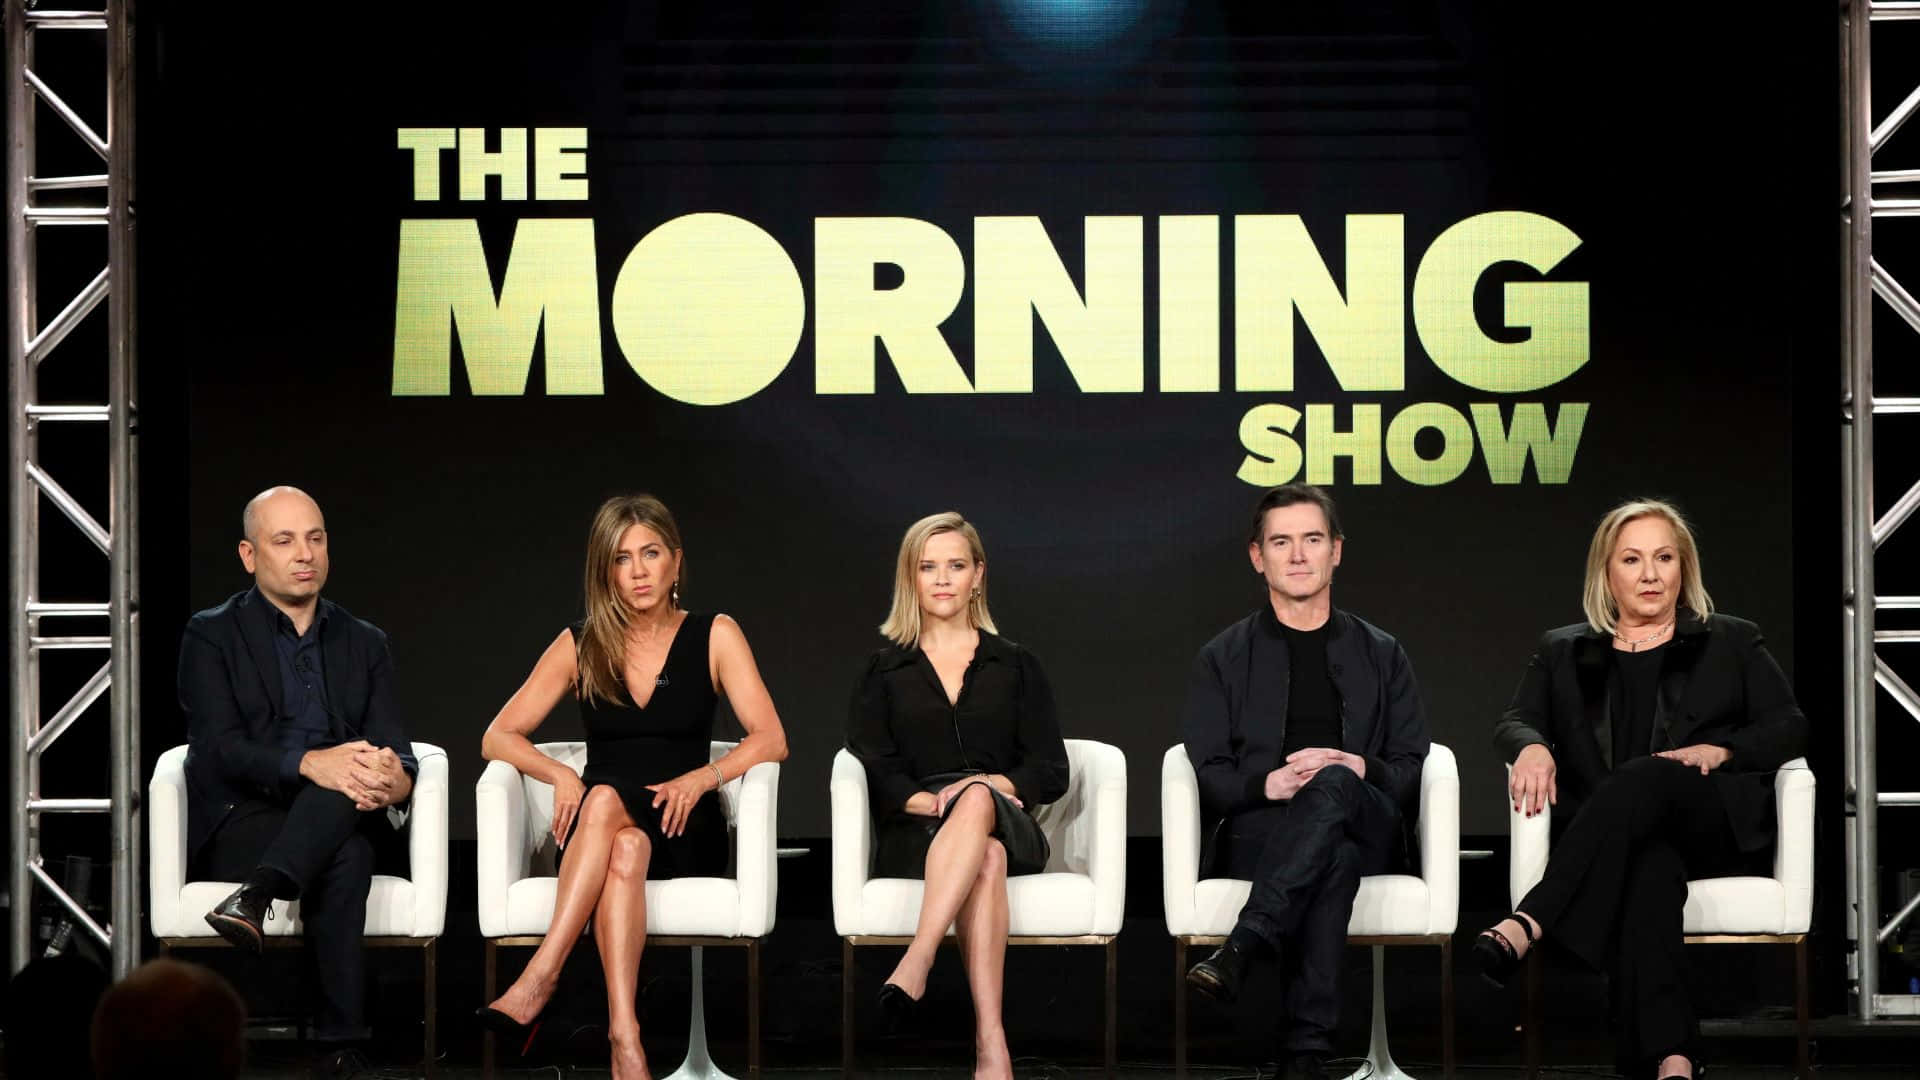 The Morning Show Cast Panel Discussion Wallpaper